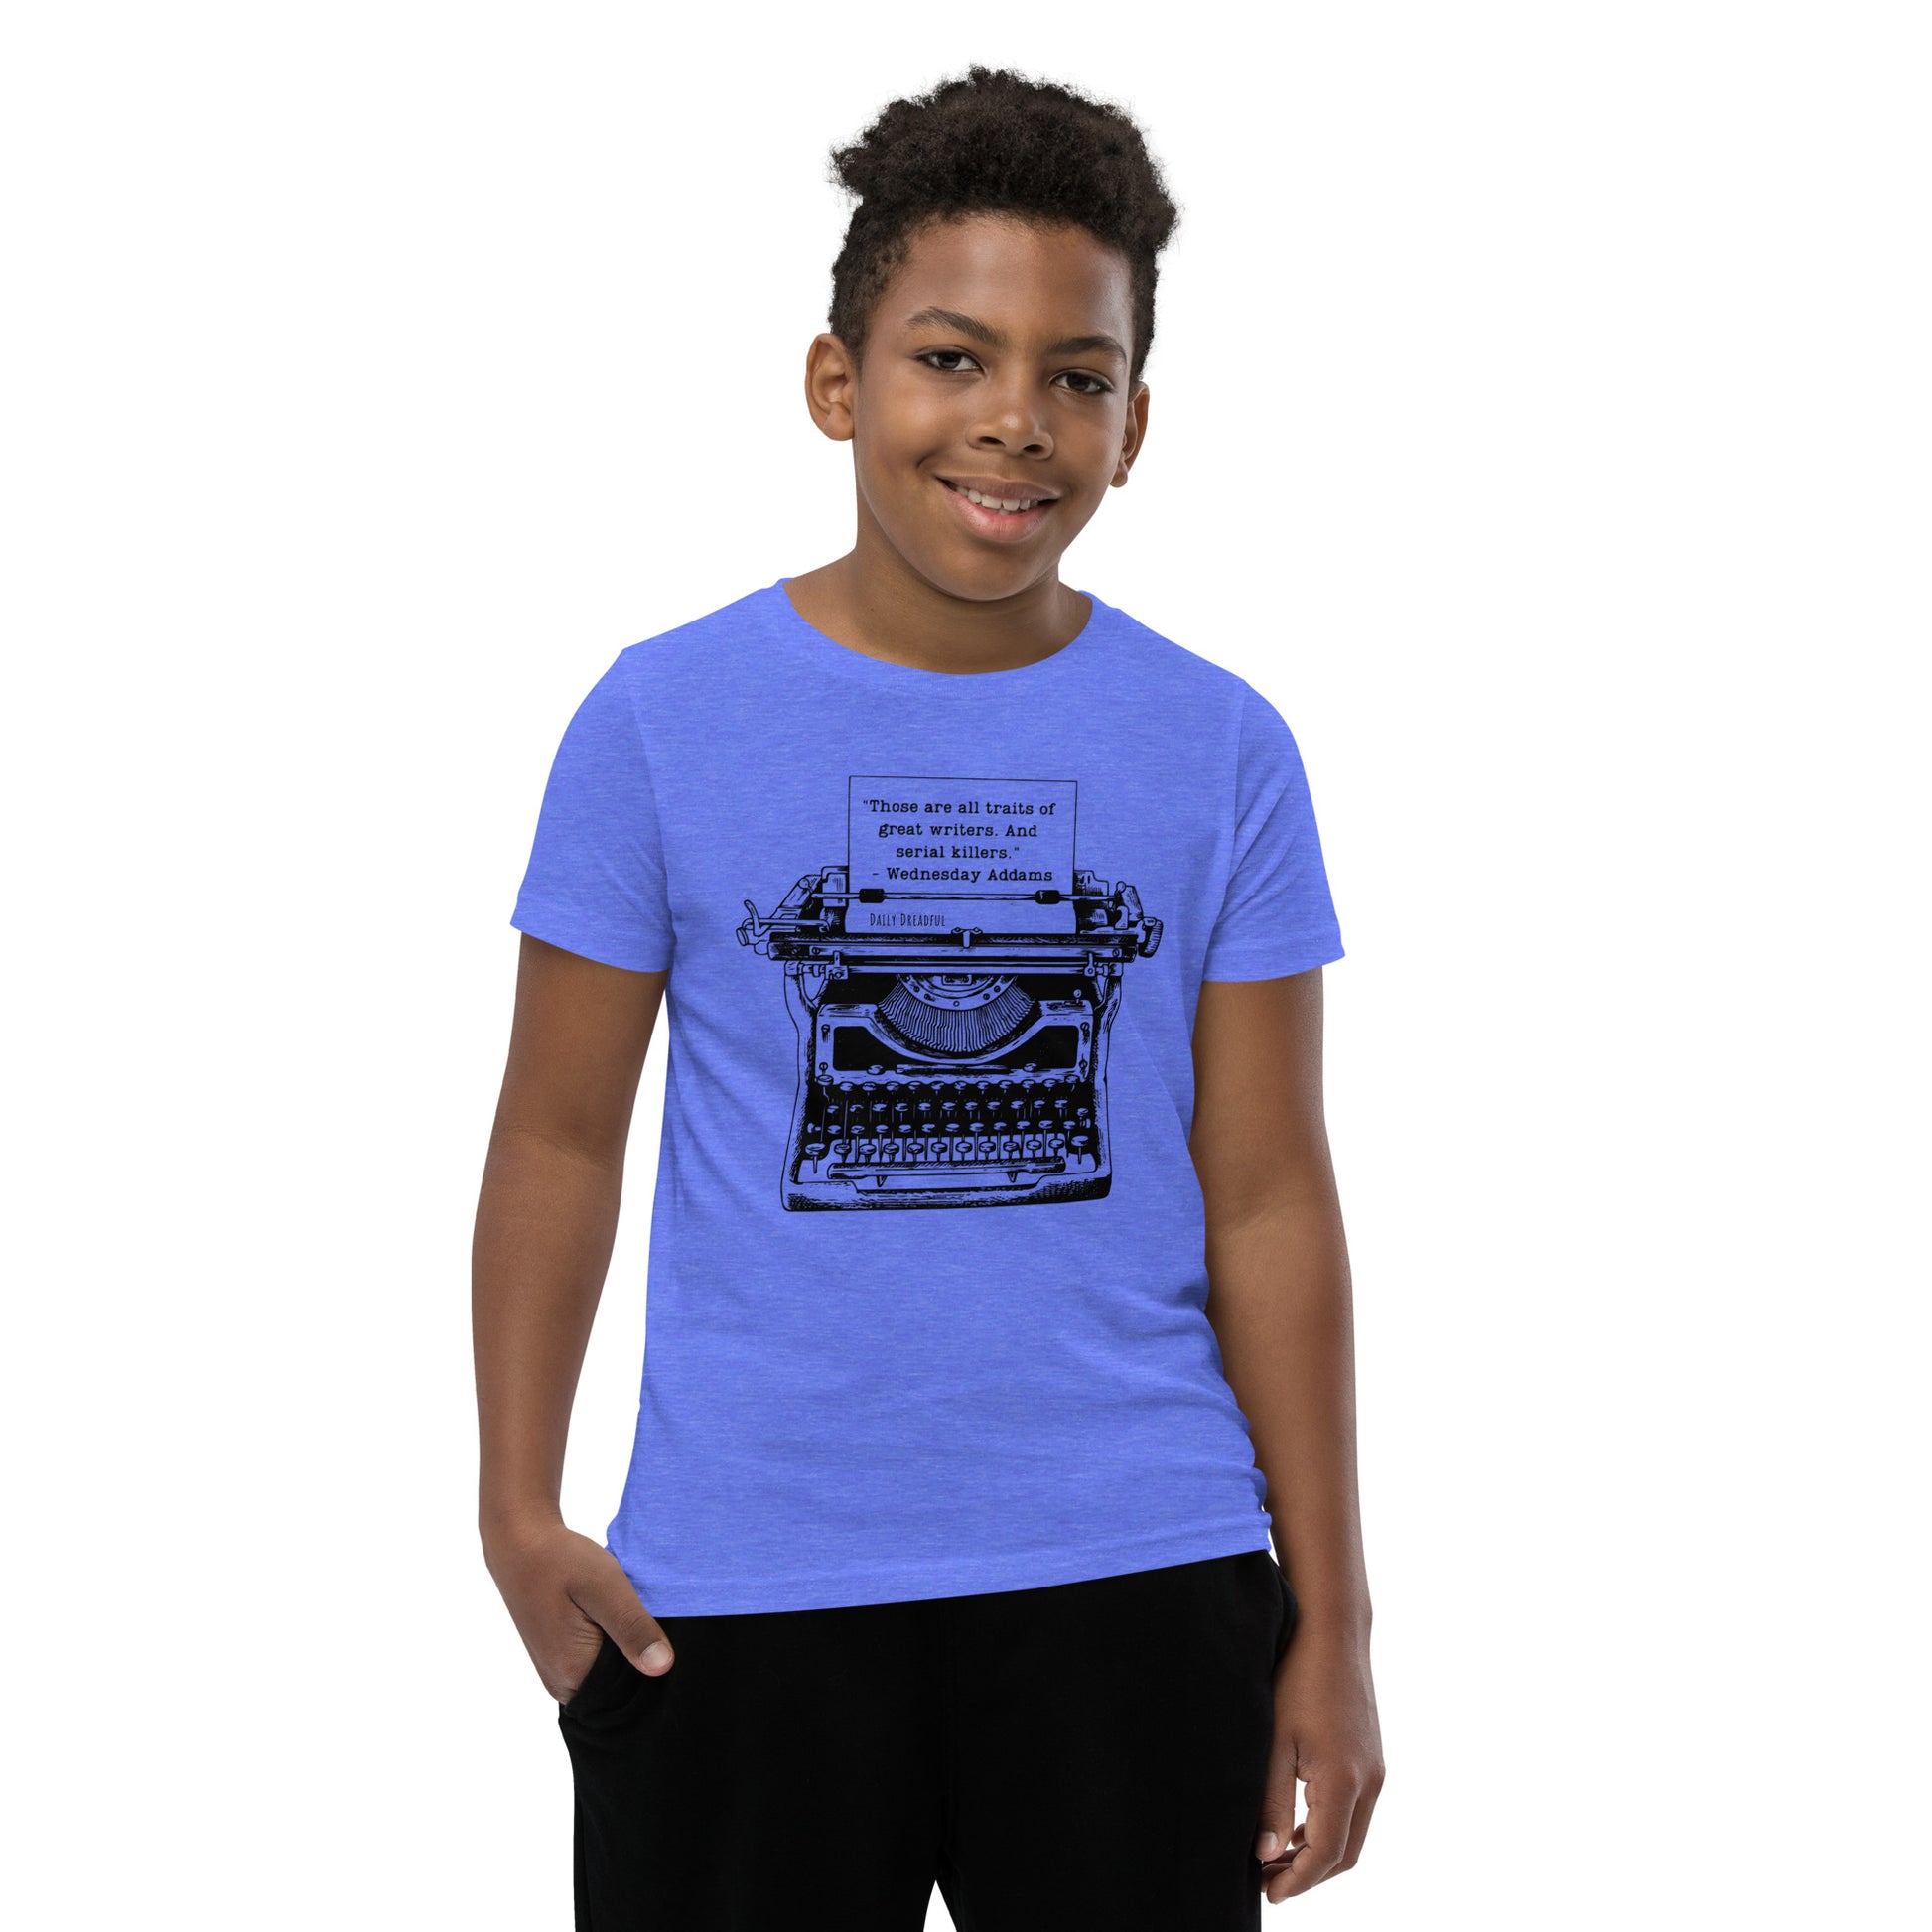 heather columbia blue "Wednesday Addams Typewriter" Youth Short Sleeve T-Shirt from Daily Dreadful